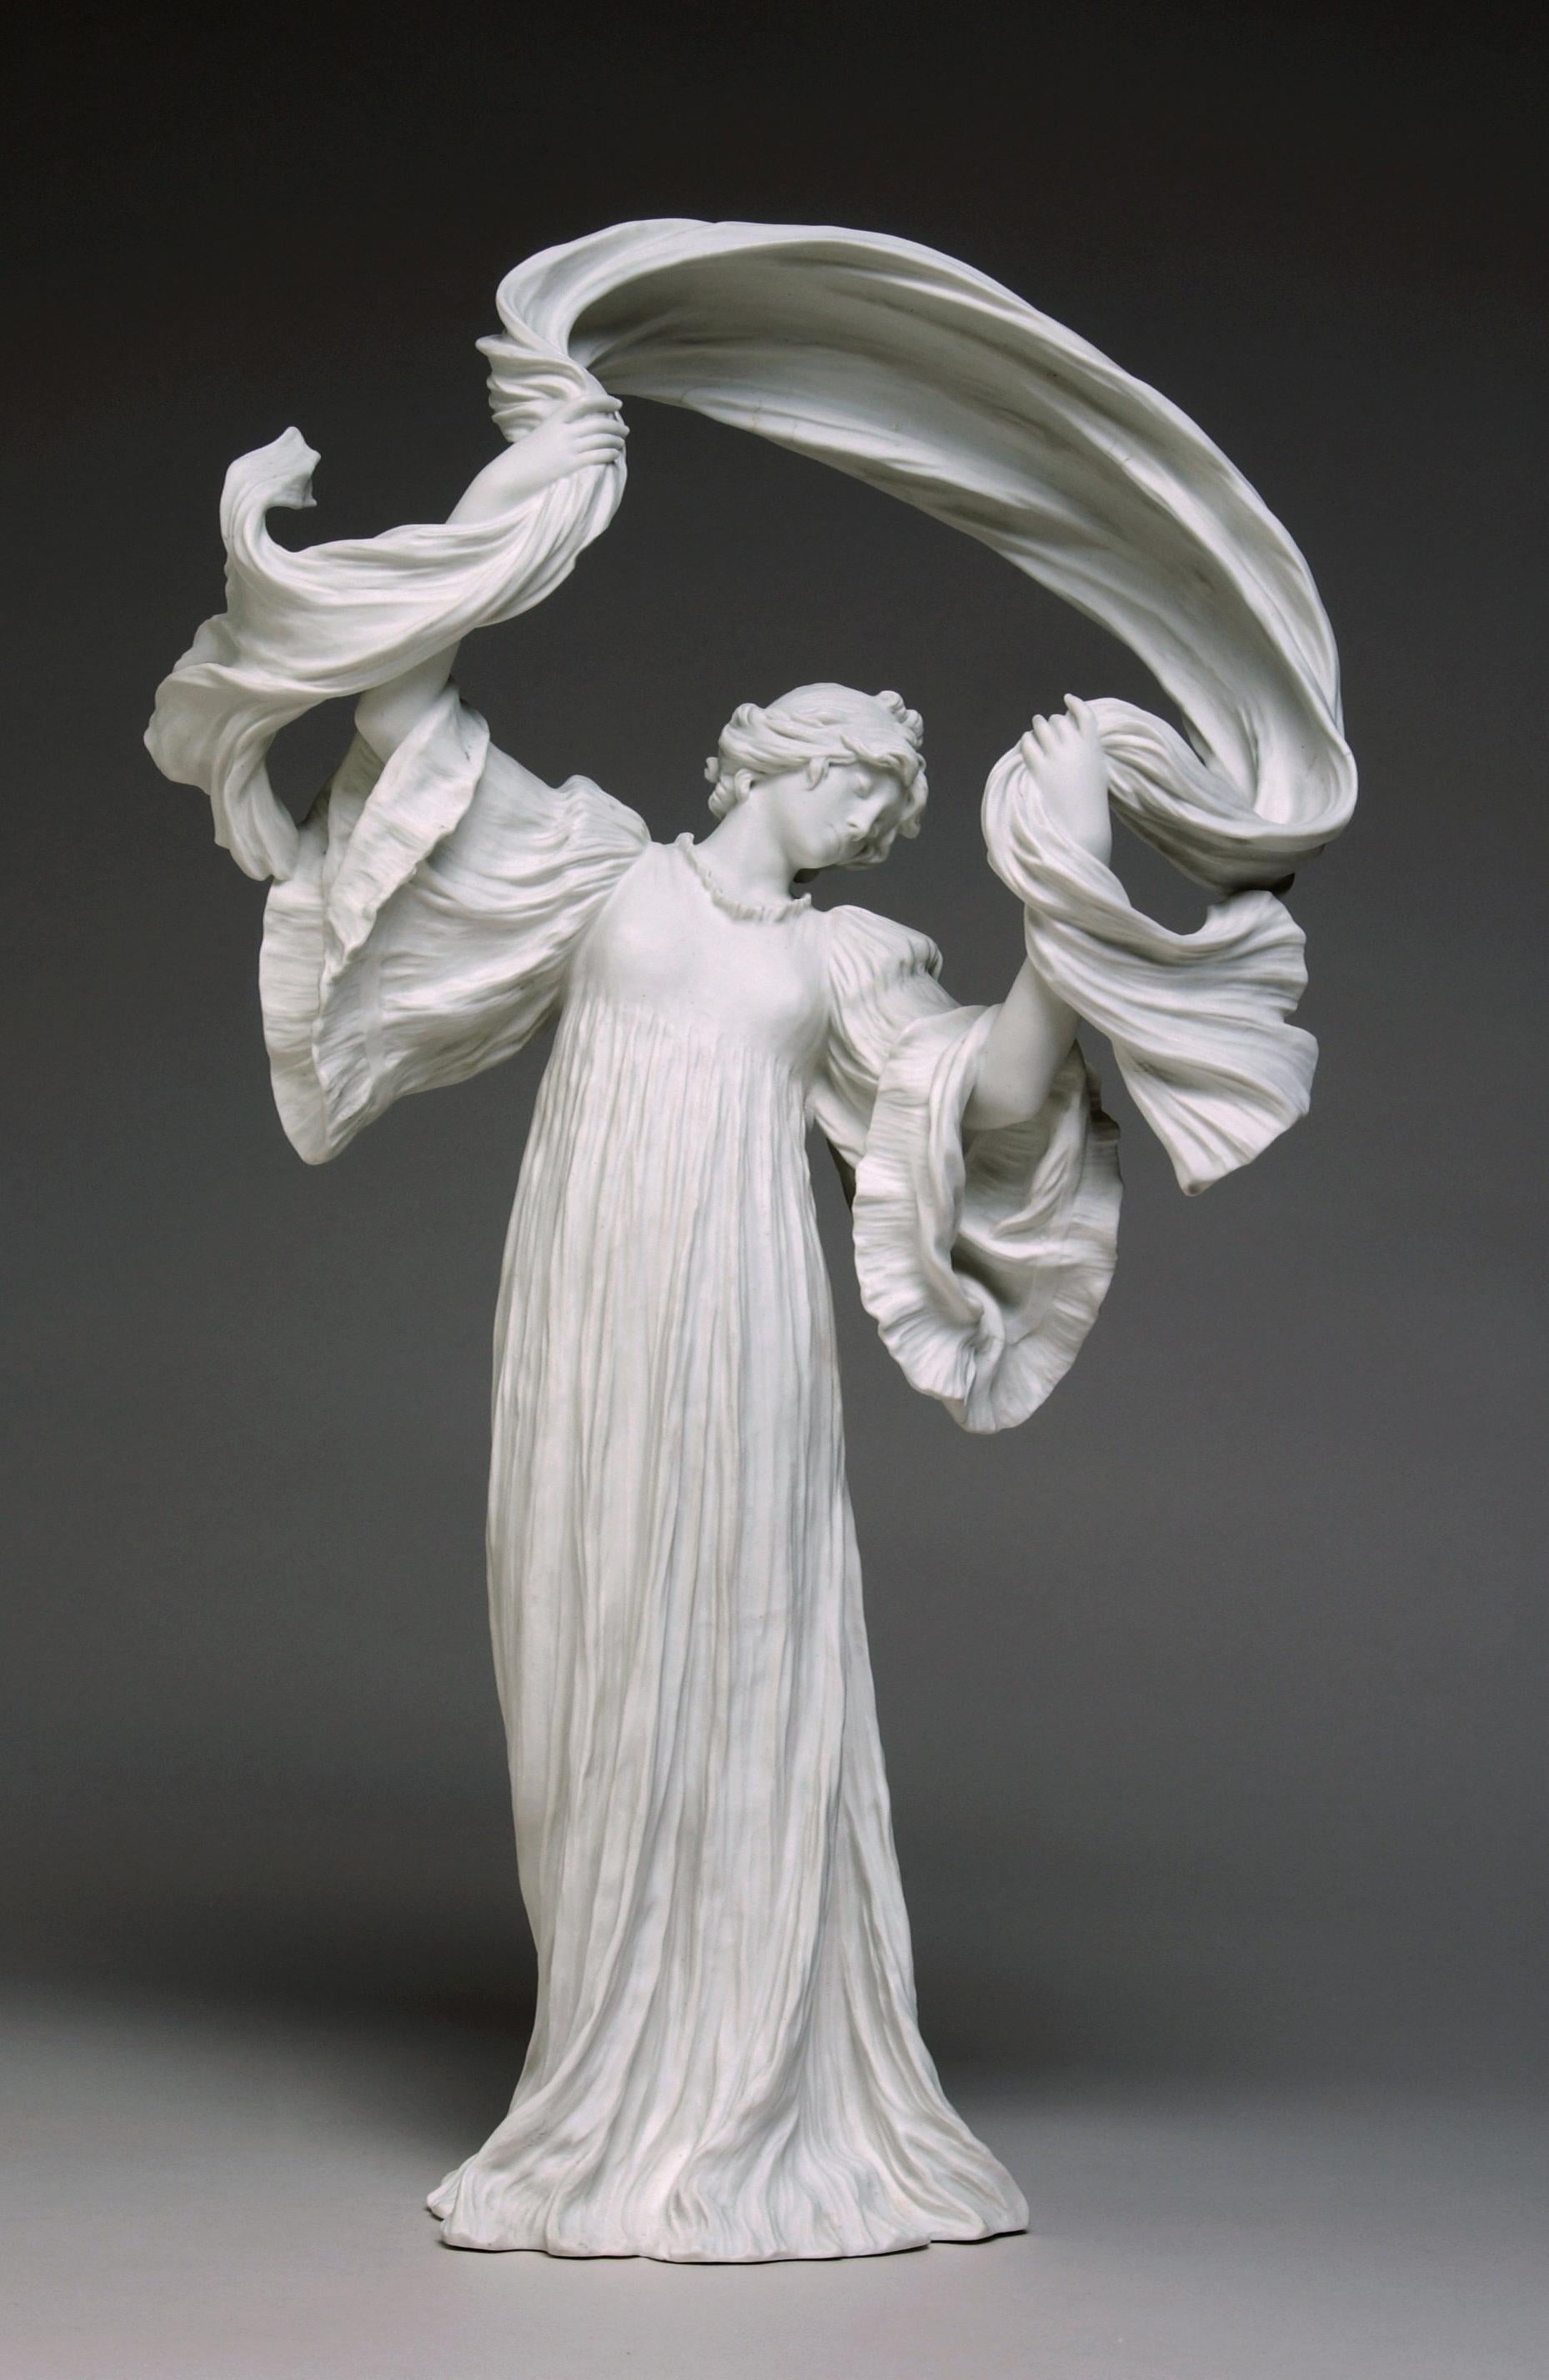 This work is a part of 'The Scarf Game'—a centerpiece consisting of 15 different sculptures of dancers. Art Nouveau influences dominate the collection, with clear motifs and references to nature and femininity. The sculptor, Agathon Léonard,